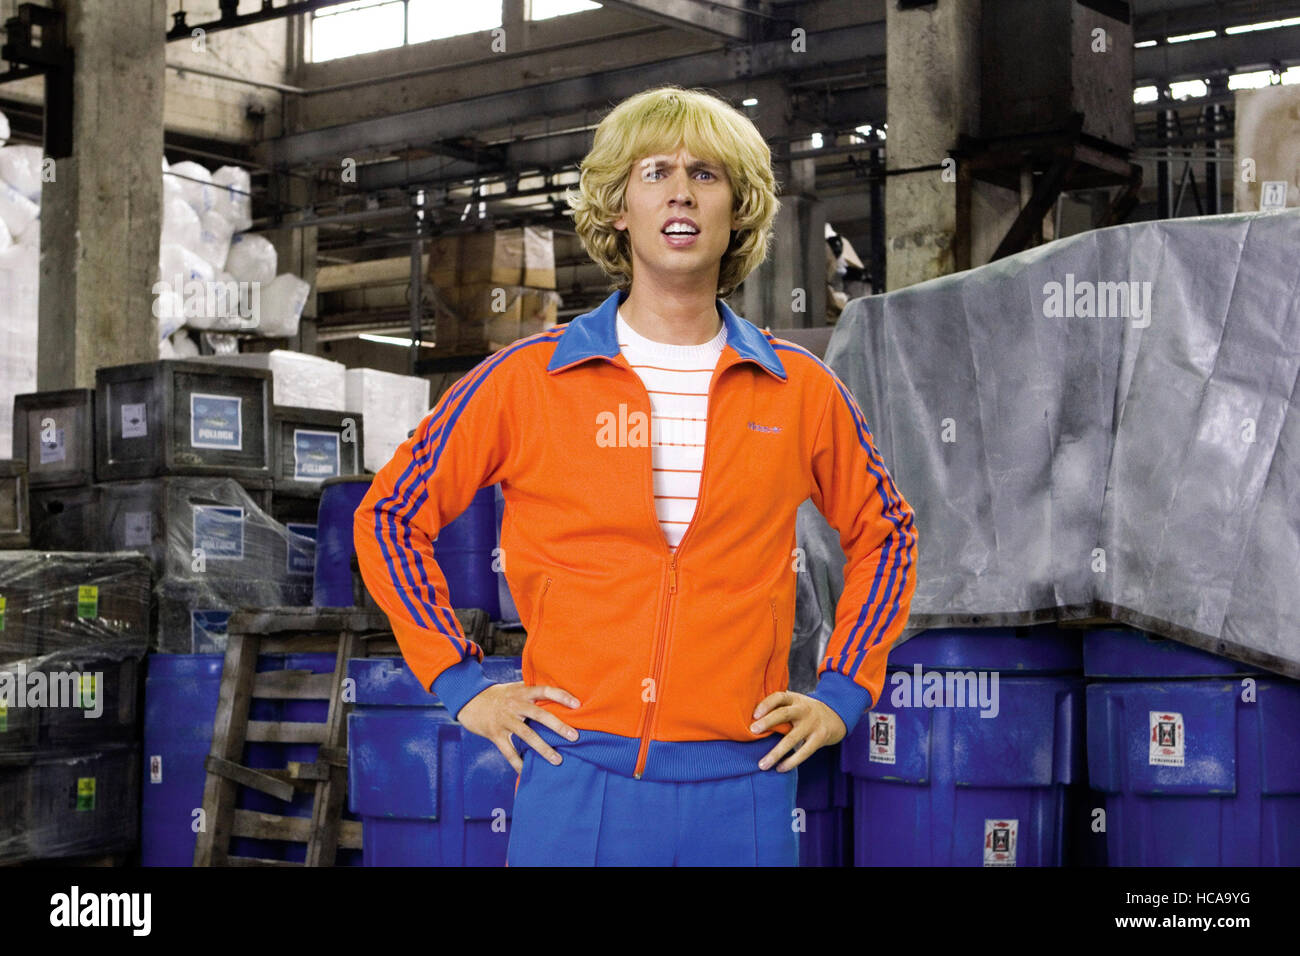 BLADES OF GLORY, Jon Heder, 2007, © Paramount/courtesy Everett Collection Stock Photo